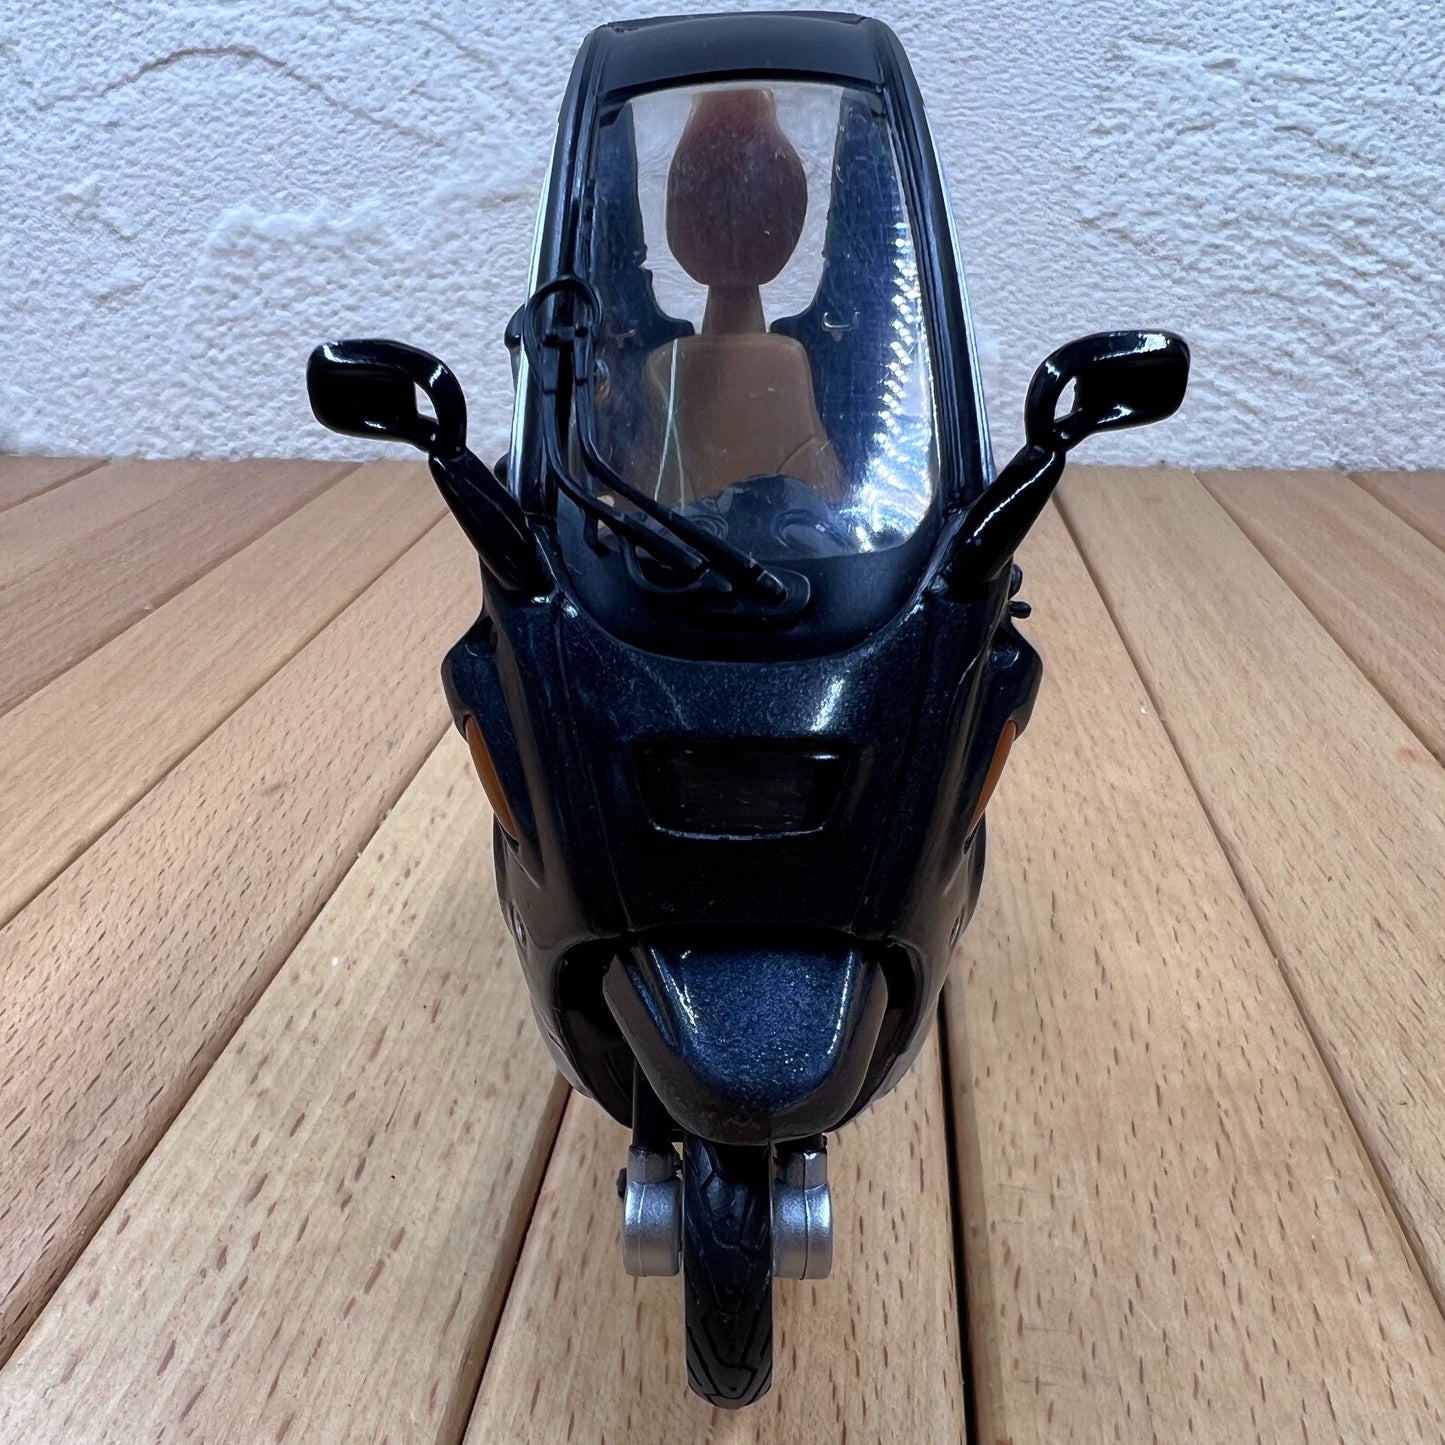 1/18 Scale BMW C1 Scooter Diecast Model Motorcycle